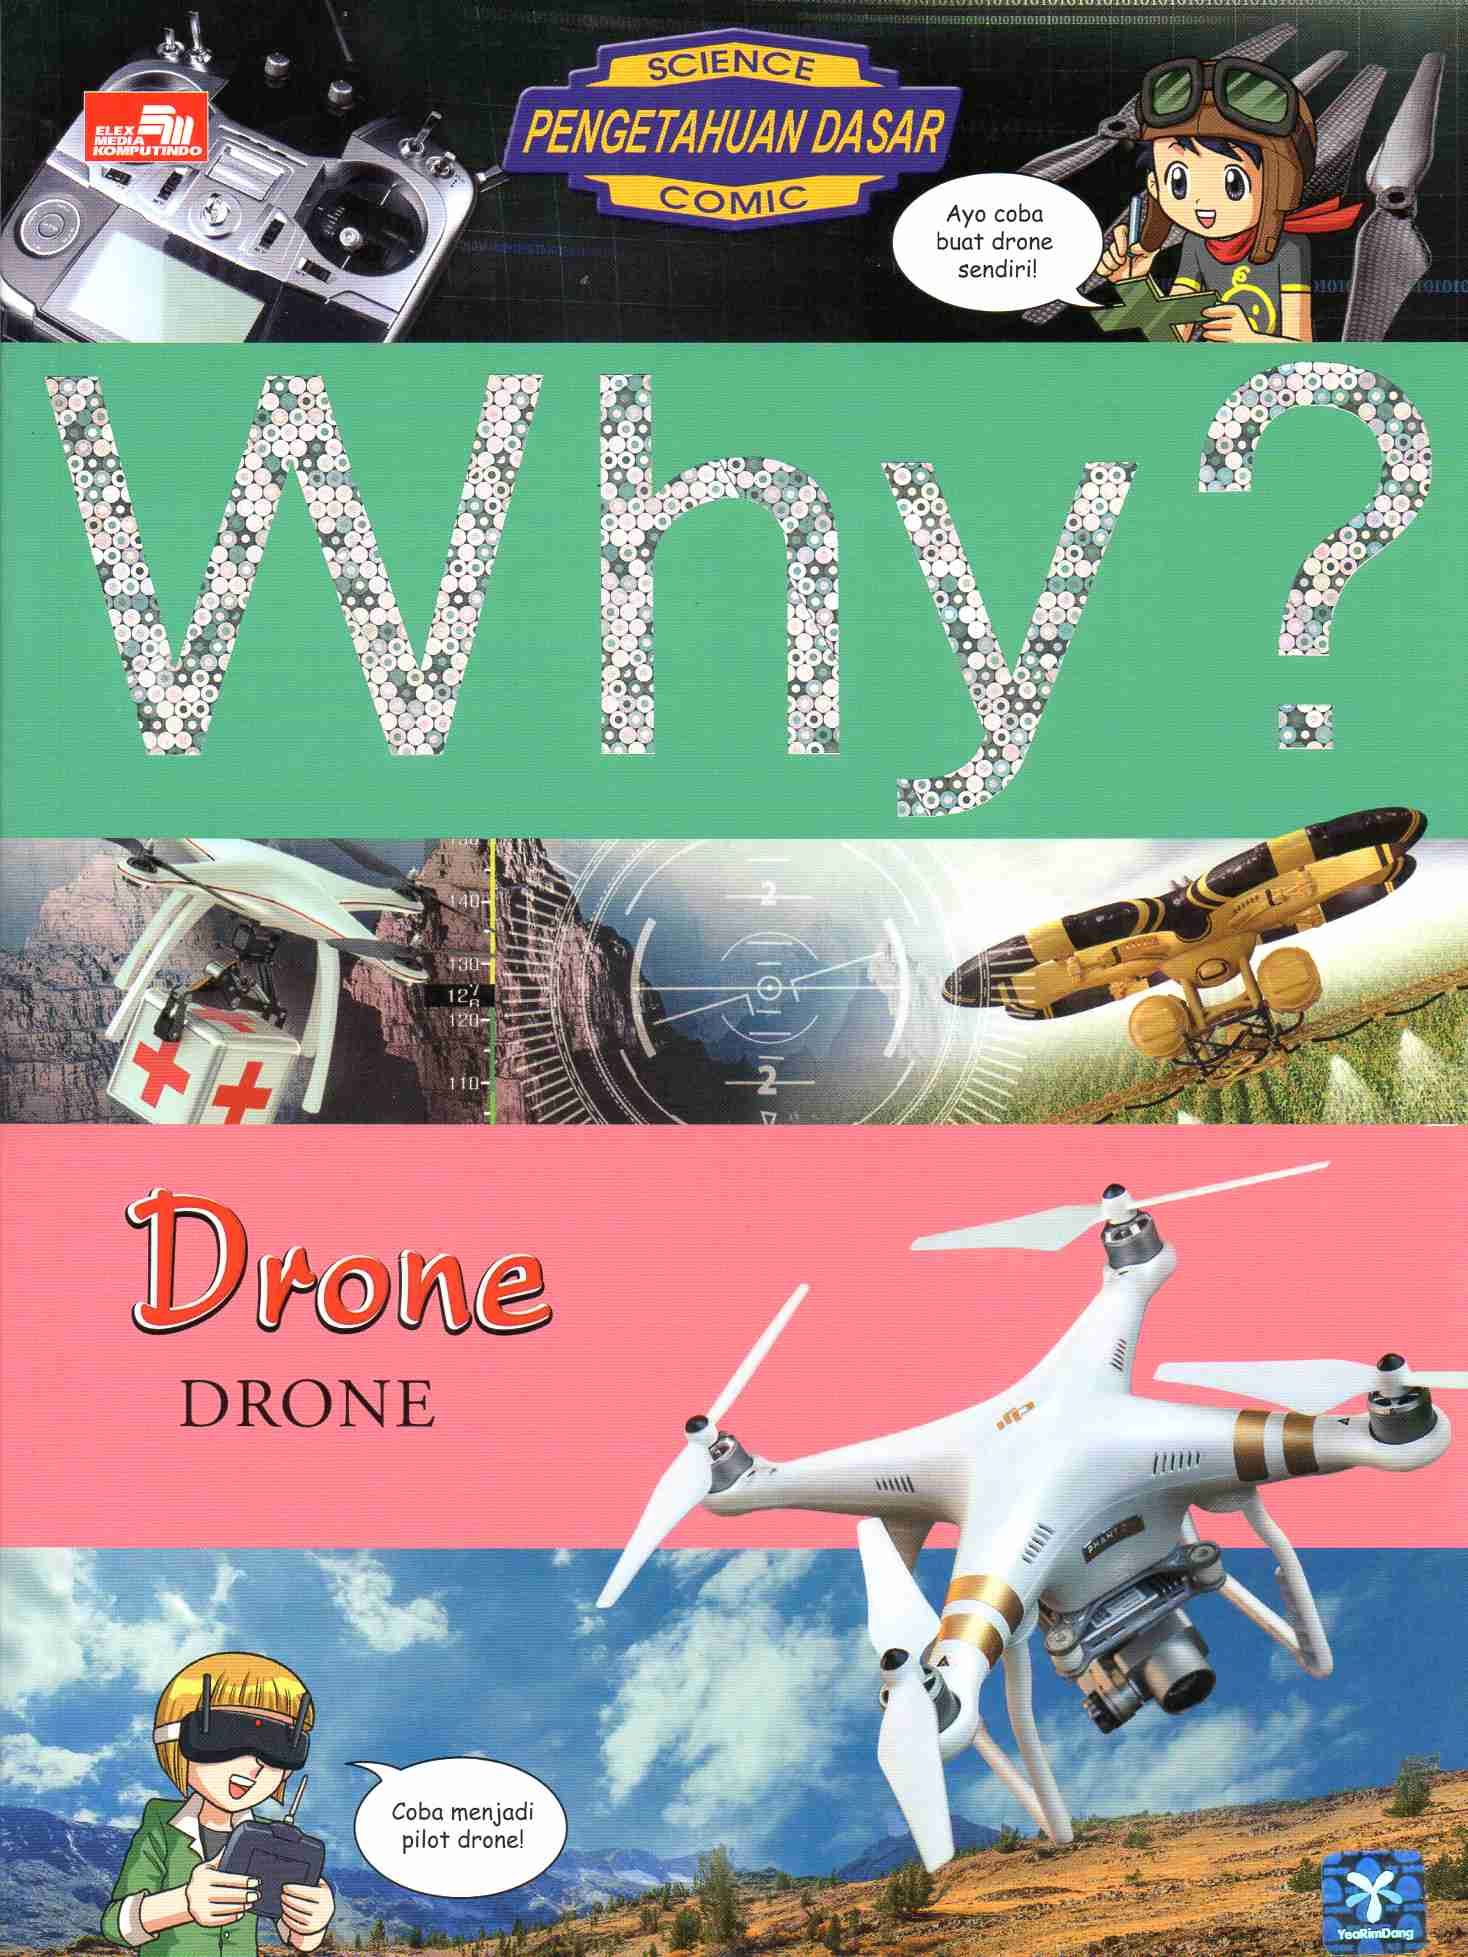 WHY? Drone